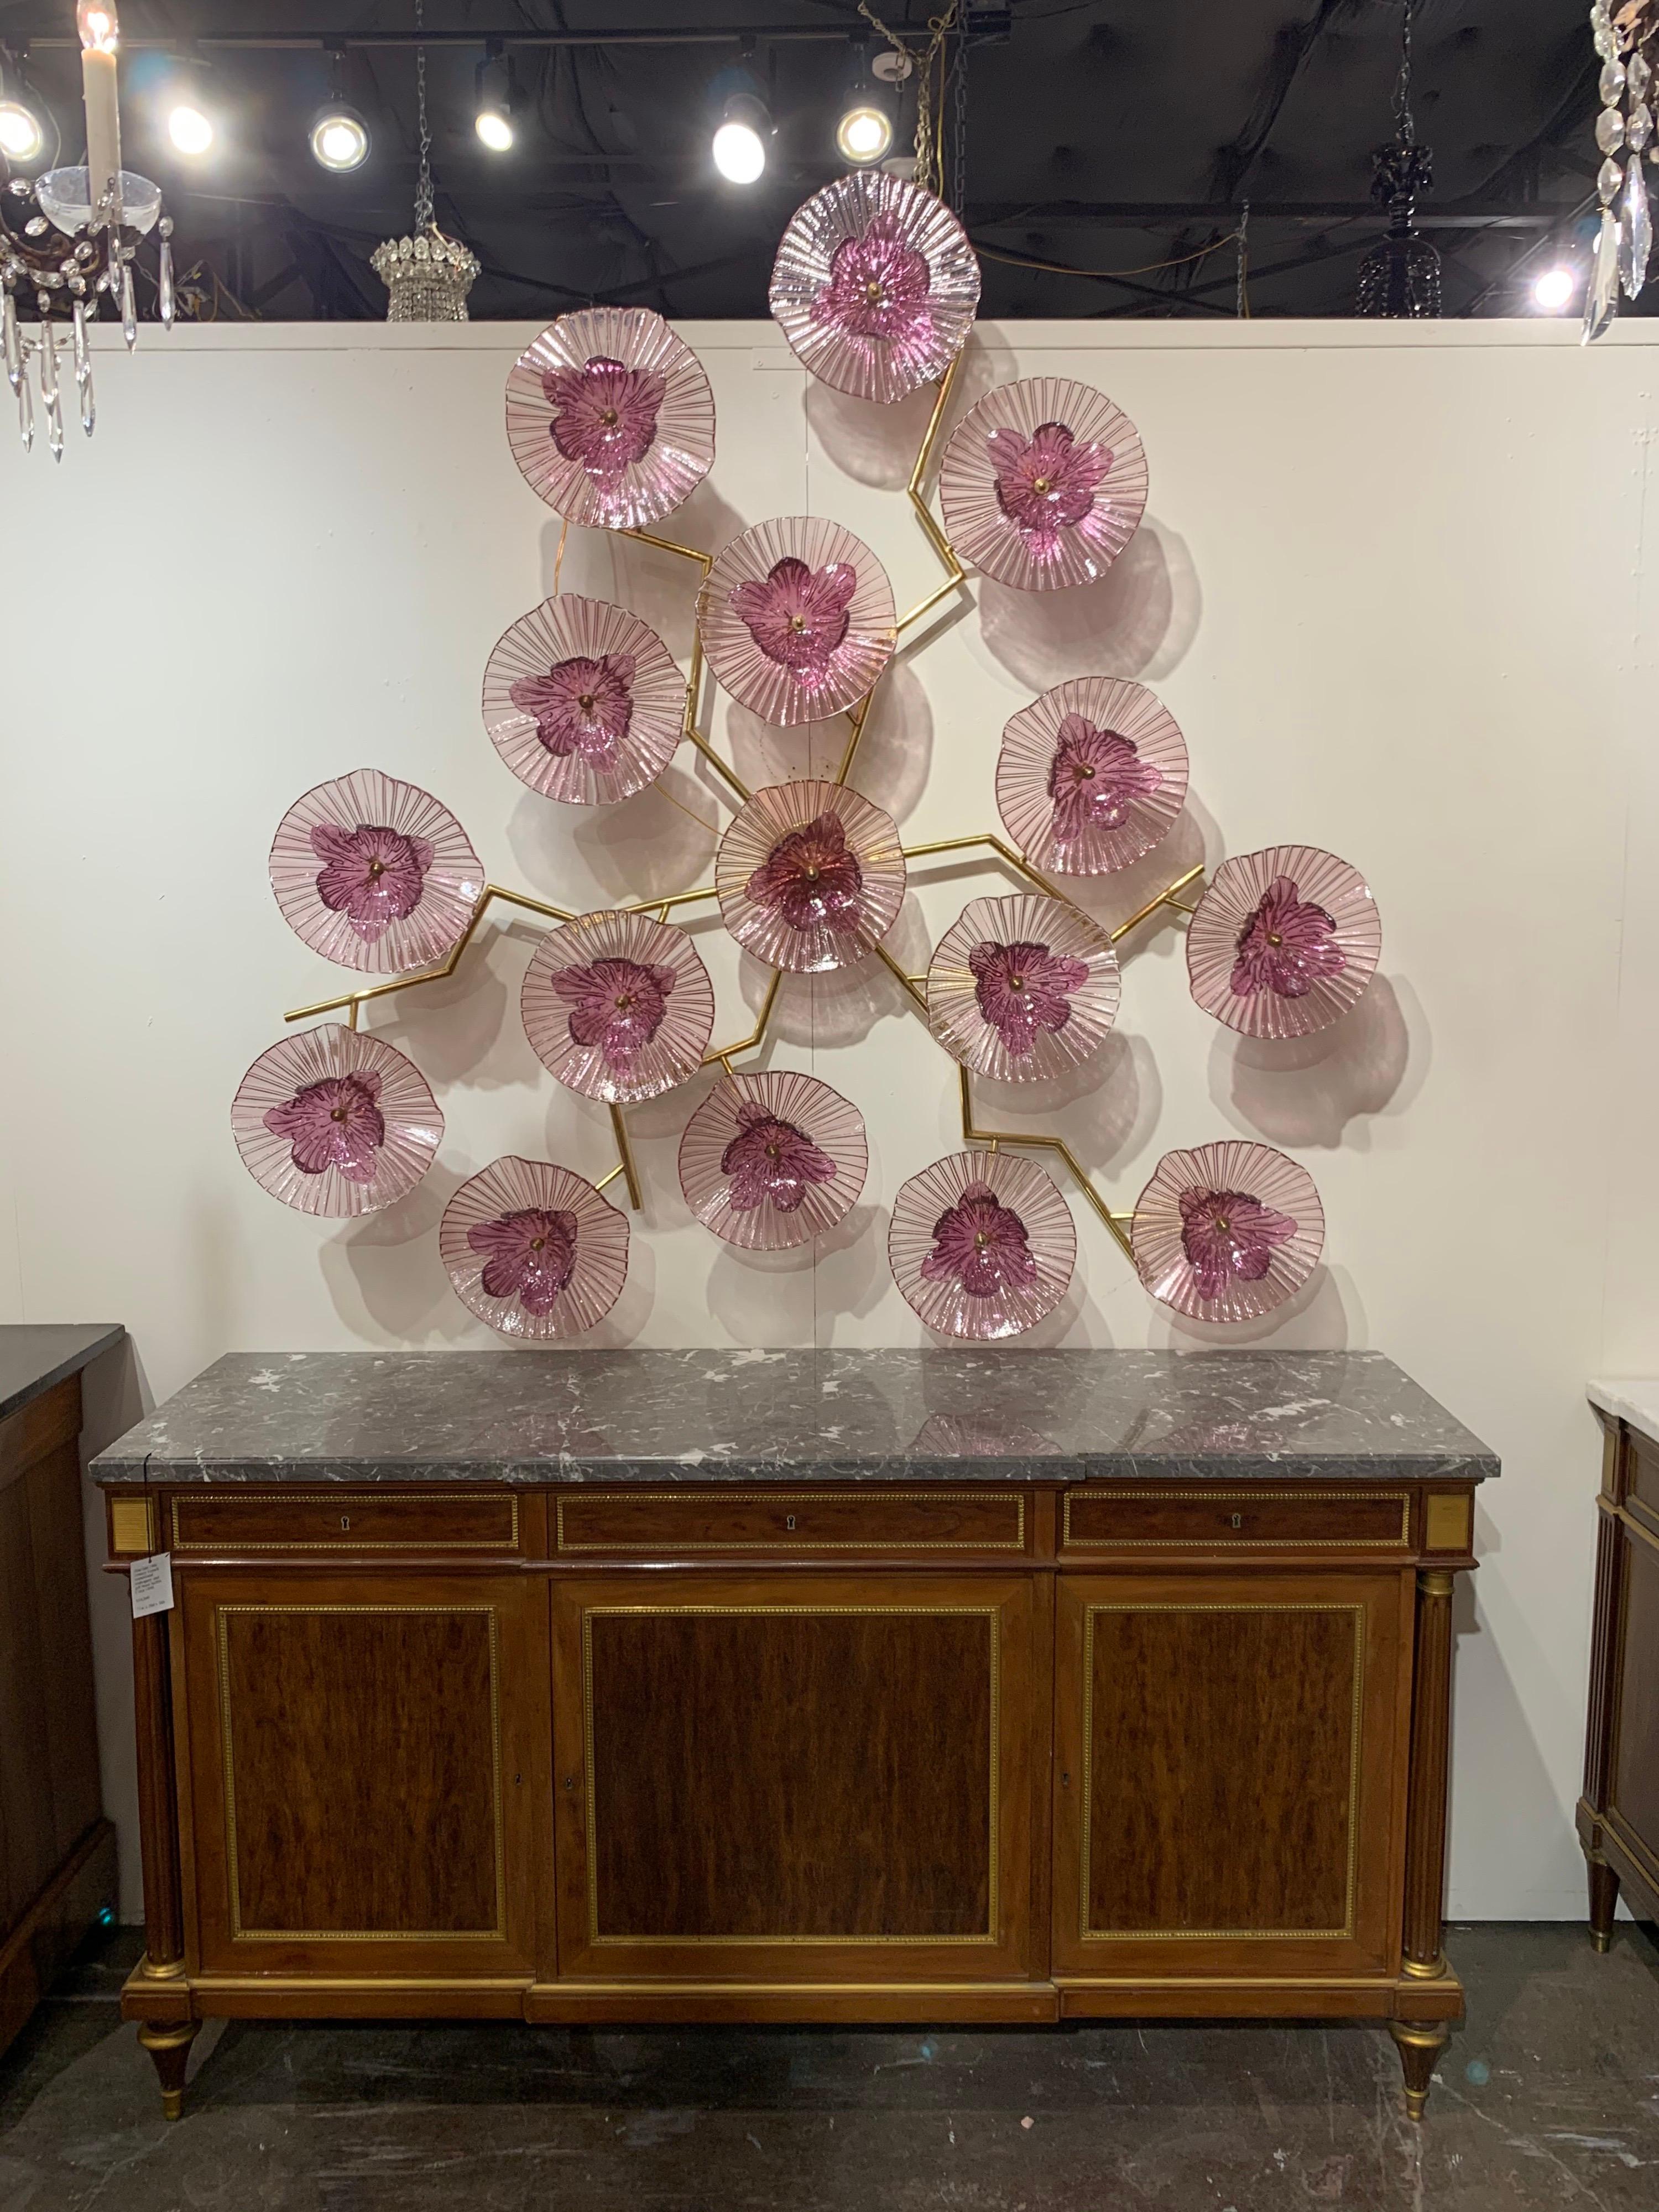 Spectacular modern purple Murano glass flower form wall art on a brass frame. Beautiful delicate flowers light up! A fabulous impact piece that is a real work of art!